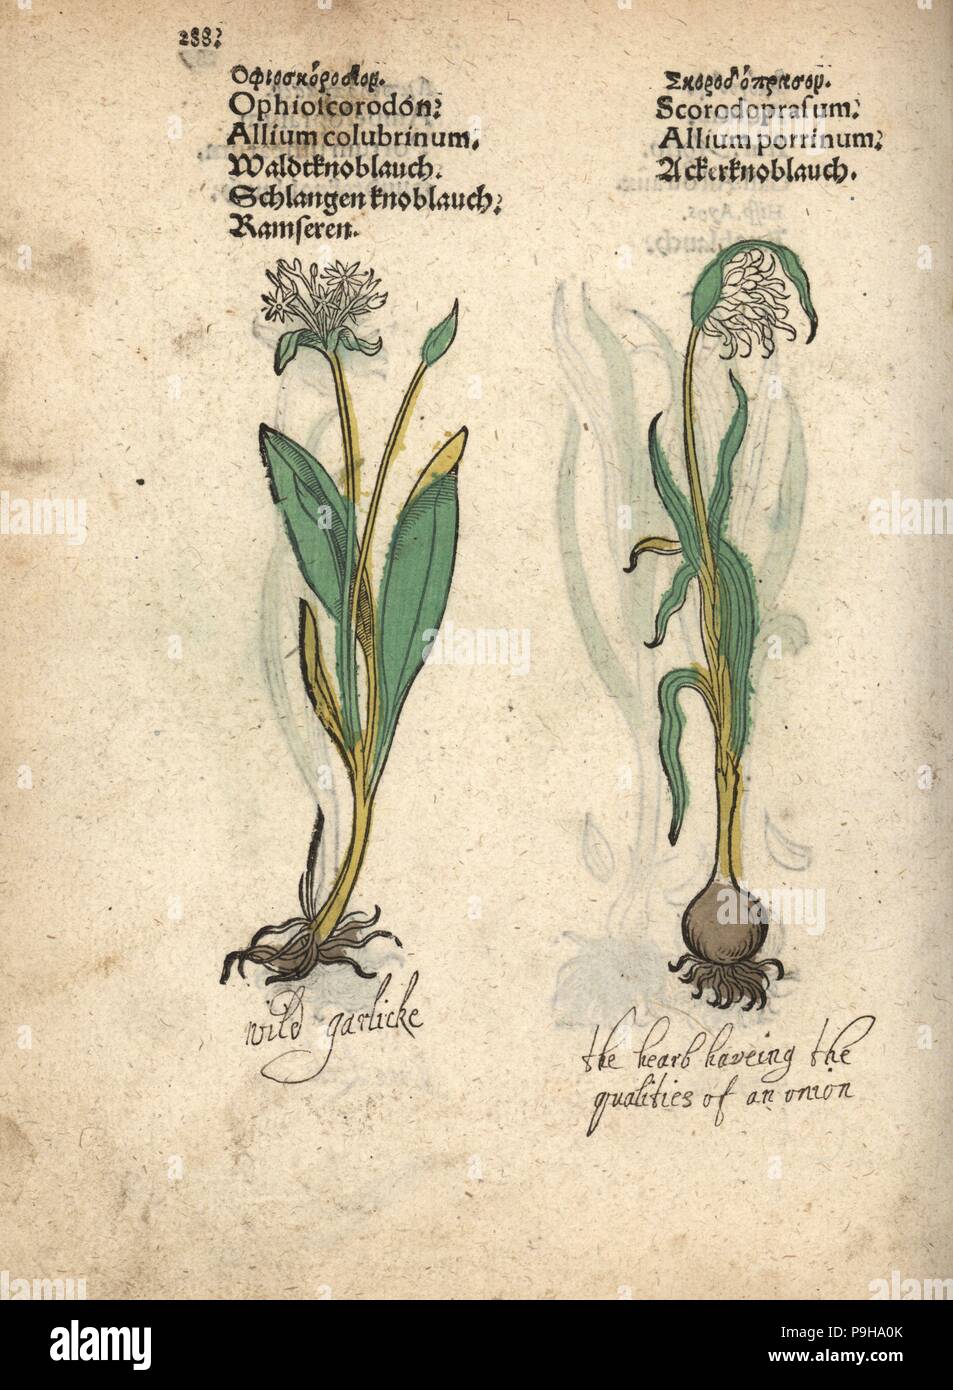 Wild garlic, Allium sativum var. ophioscorodon, and sand leek, Allium scorodoprasum. Handcoloured woodblock engraving of a botanical illustration from Adam Lonicer's Krauterbuch, or Herbal, Frankfurt, 1557. This from a 17th century pirate edition or atlas of illustrations only, with captions in Latin, Greek, French, Italian, German, and in English manuscript. Stock Photo